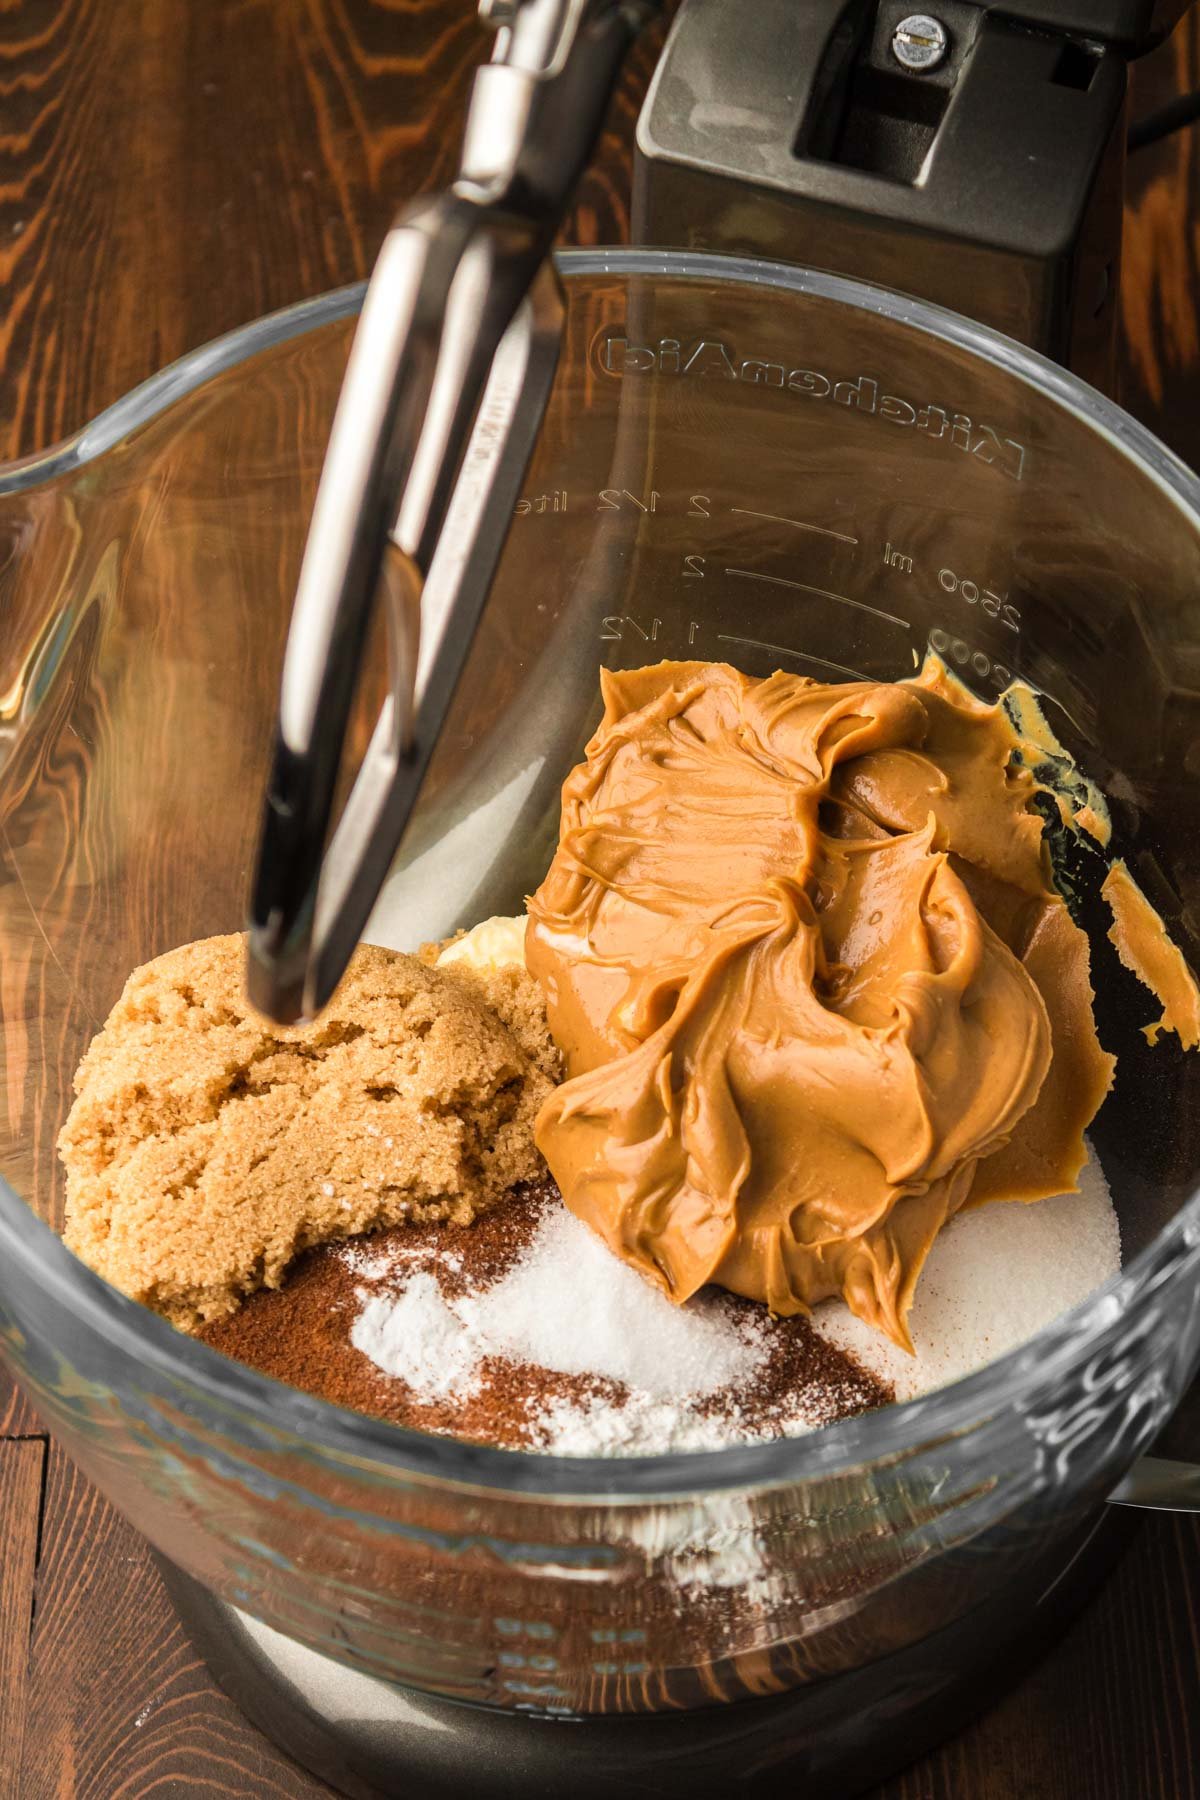 Peanut butter, sugar, coffee grounds and other ingredients in a class stand mixer bowl.